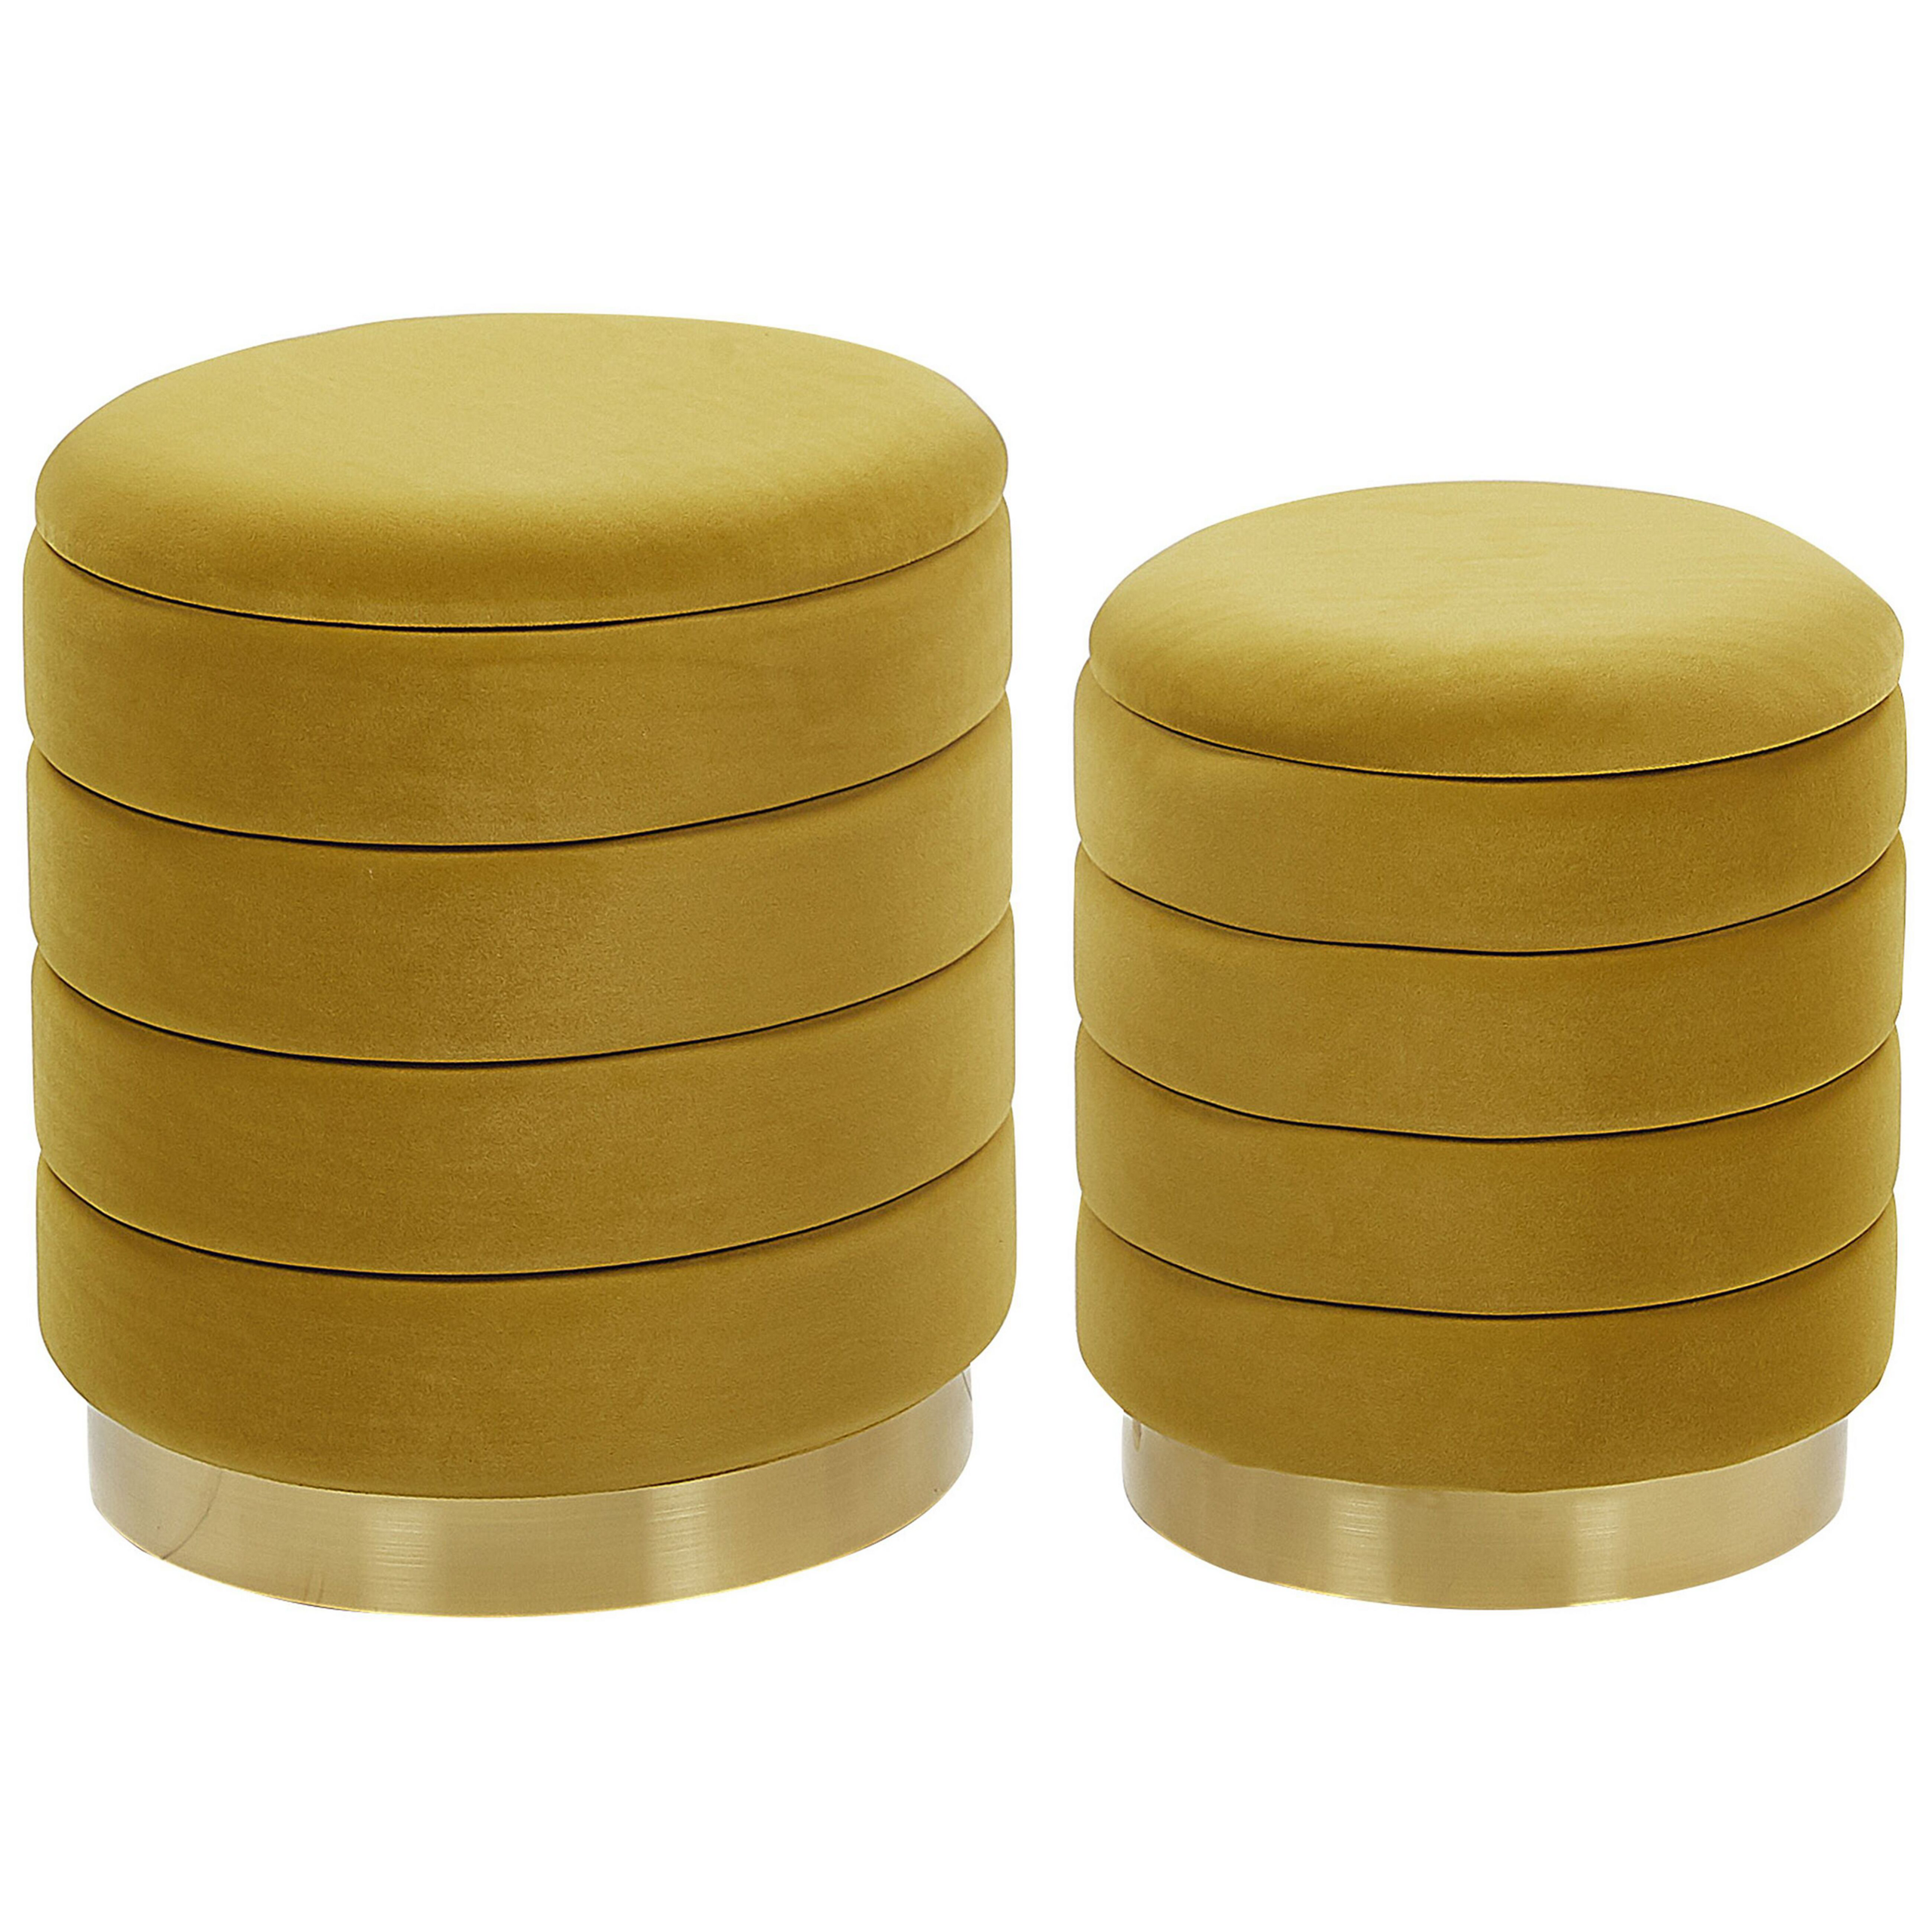 Beliani Set of 2 Storage Pouffes with Storage Yellow Polyester Velvet Upholstery Gold Stainless Steel Base Modern Design